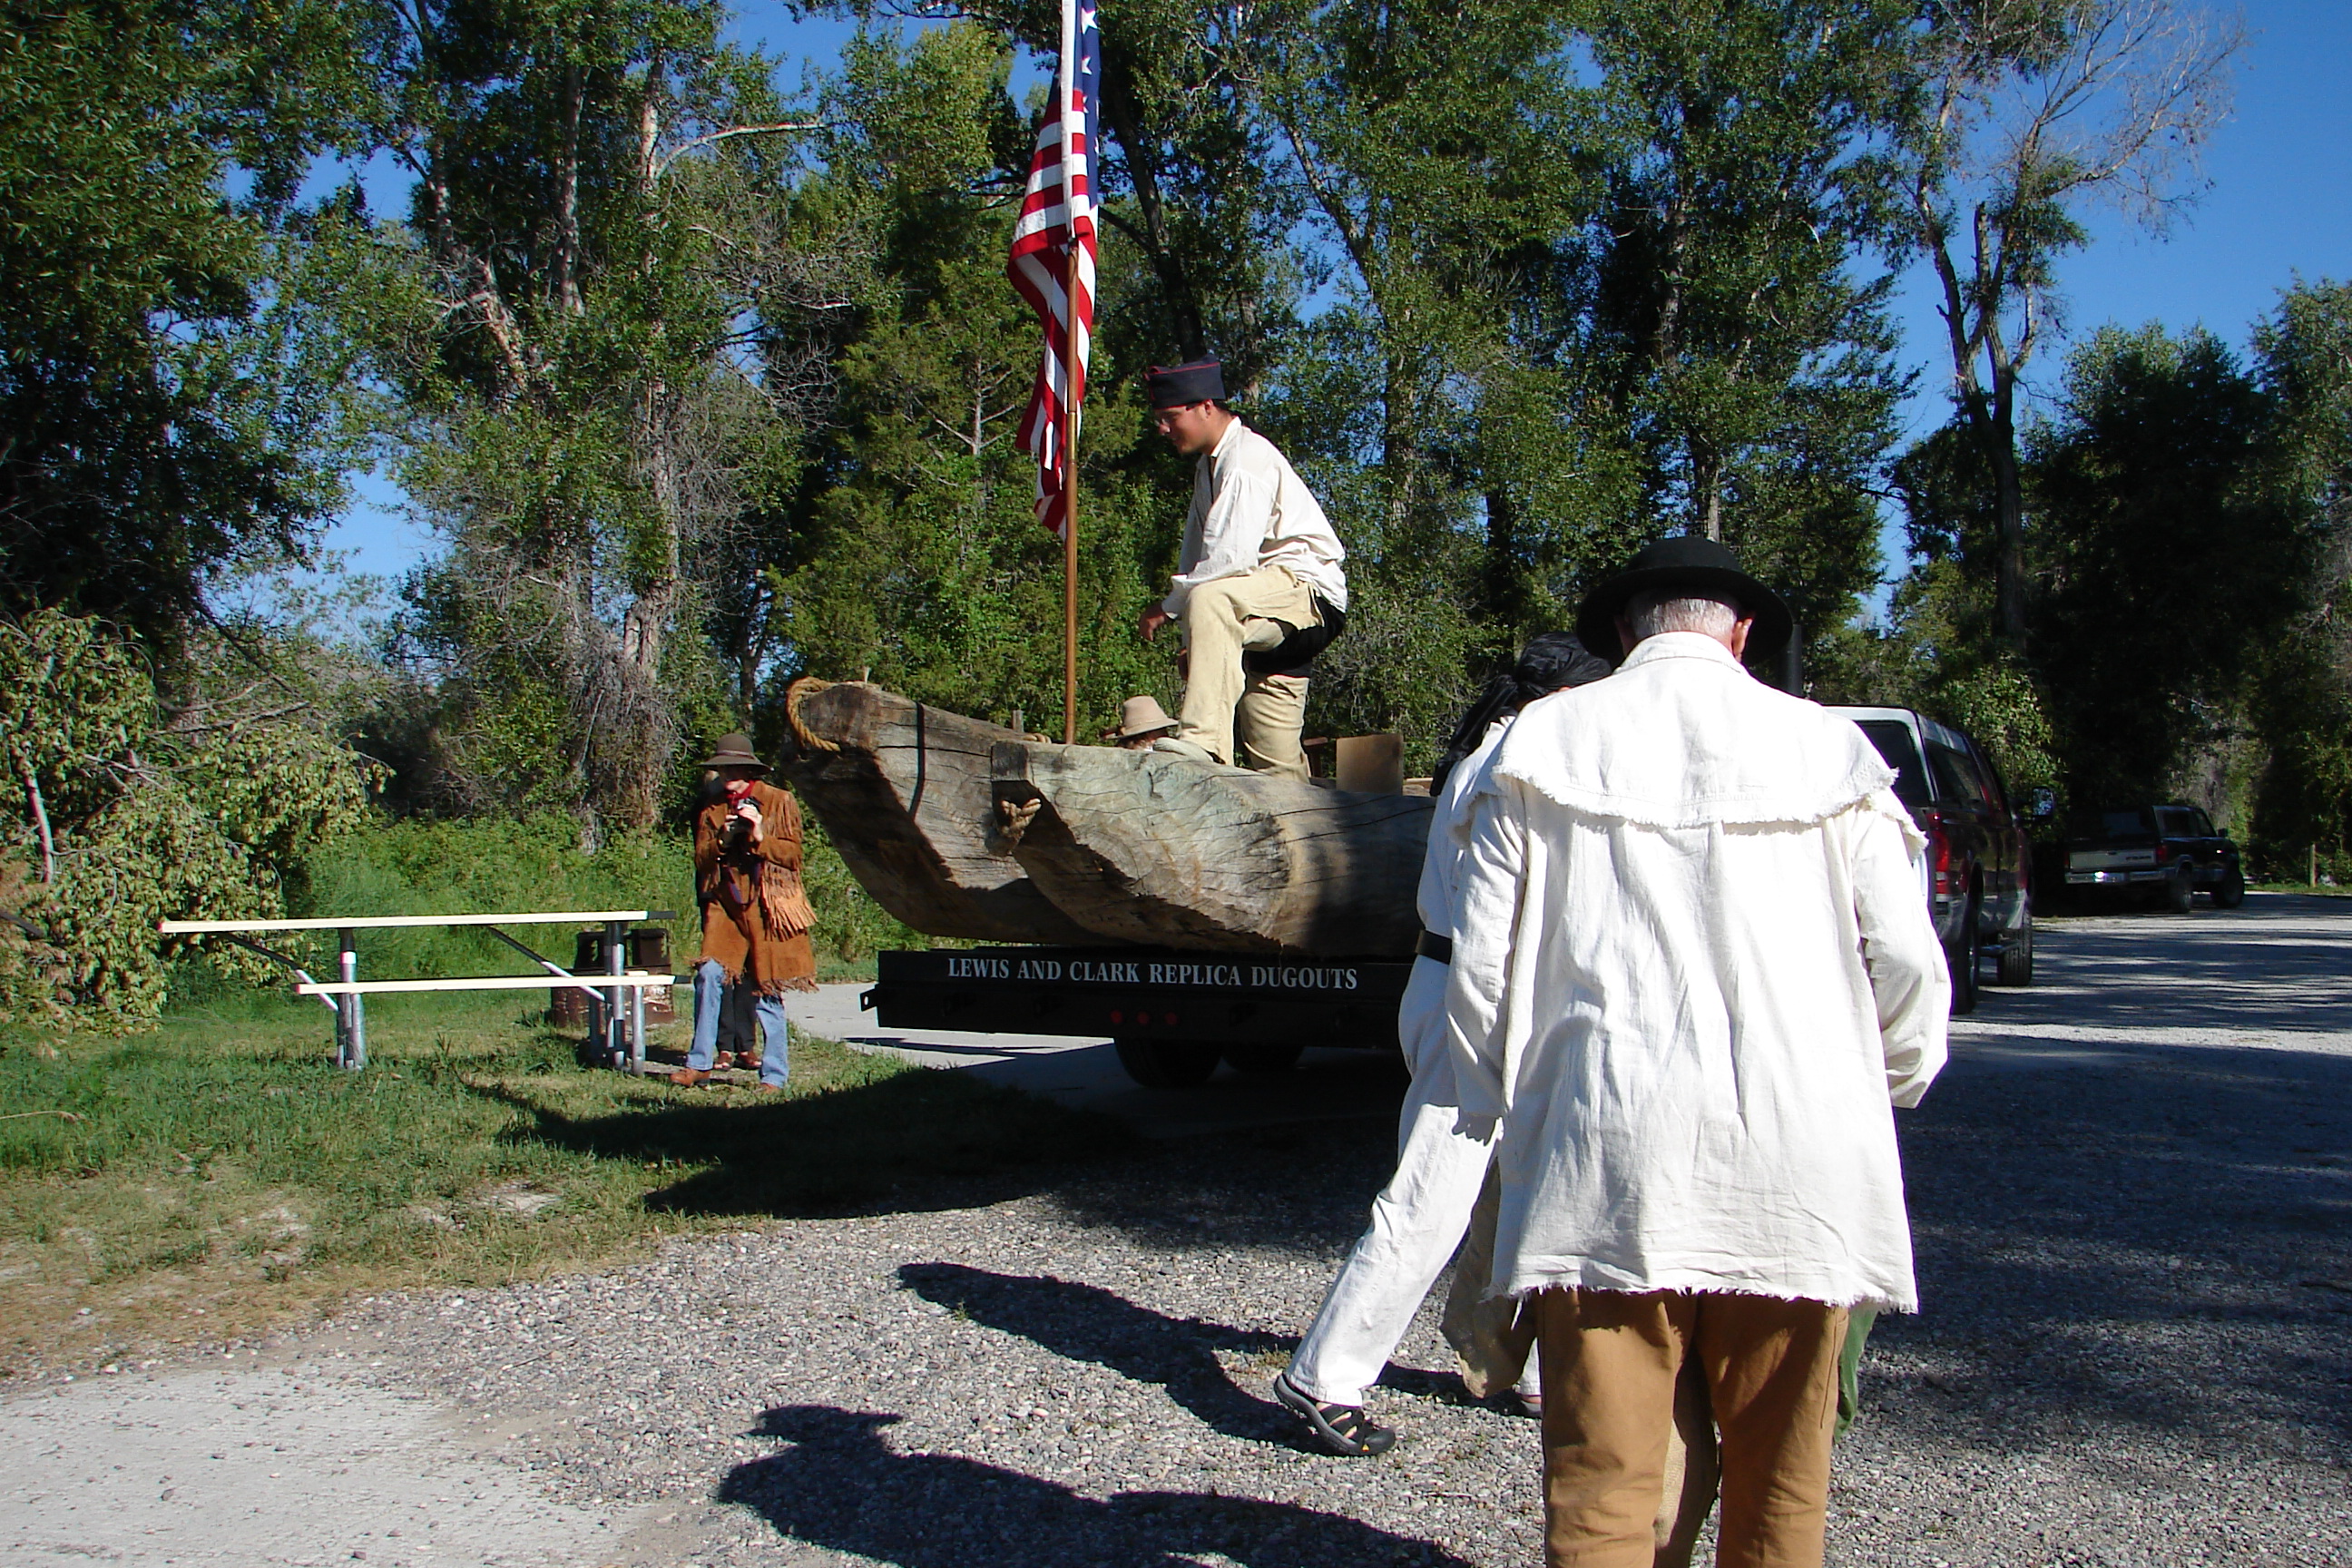 2005 Discovery Expedition of St. Charles, MO at Yorks Islands, near Townsend, Montana